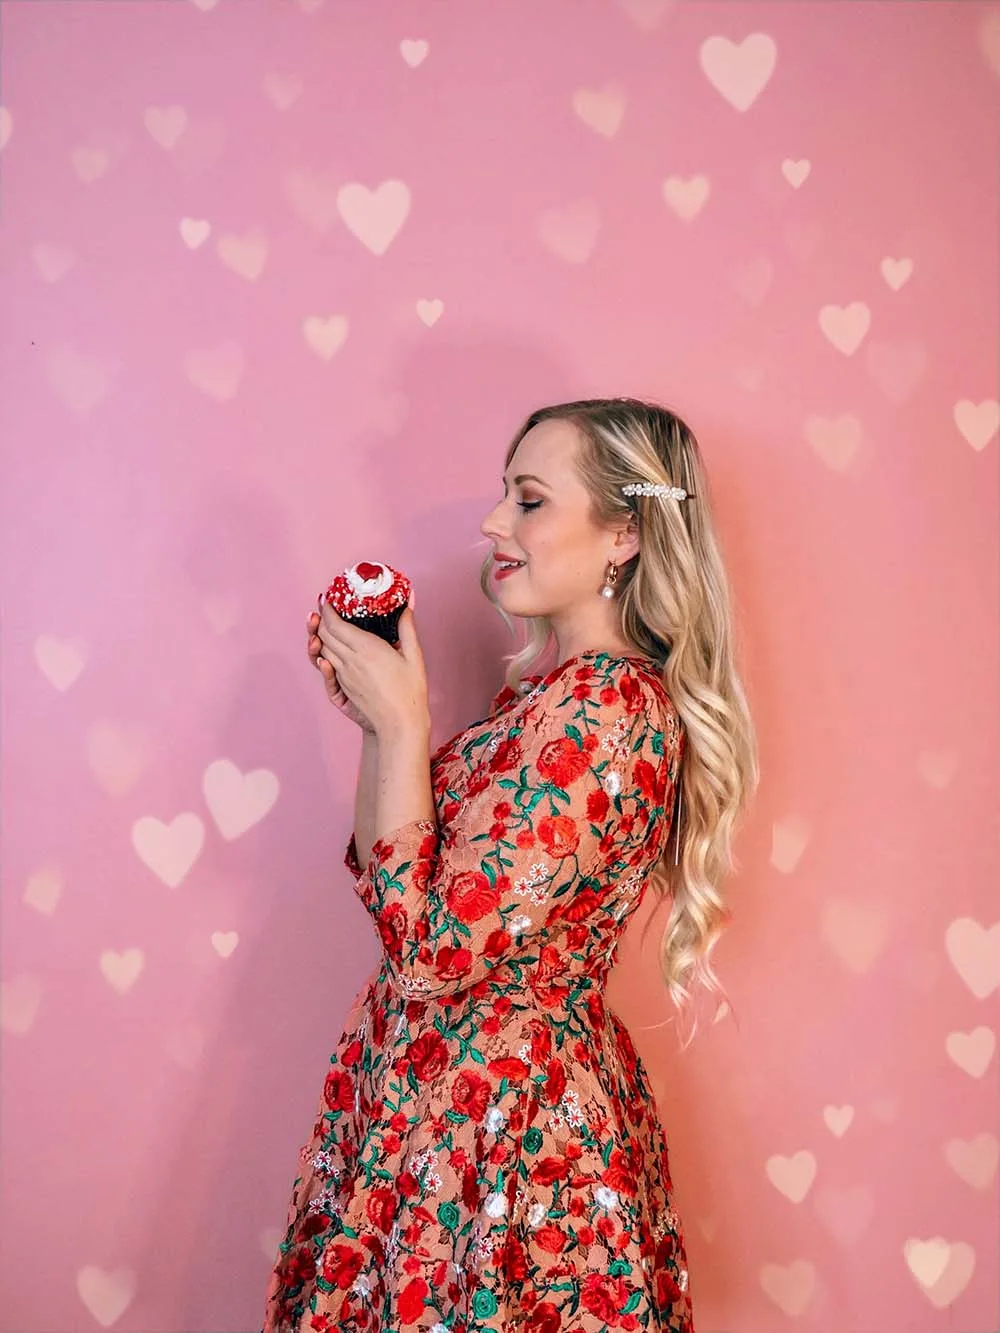 Looking for some fun & creative solo Valentine's Day photoshoot ideas to celebrate you and add a little pink and red to your instagram? This is for you! I've compiled a guide of easy Valentine's day photo ideas you can shoot at home by yourself. All of these ideas involve affordable props and are great for all photography levels. Pictured here: Do a photoshoot against a heart covered wall